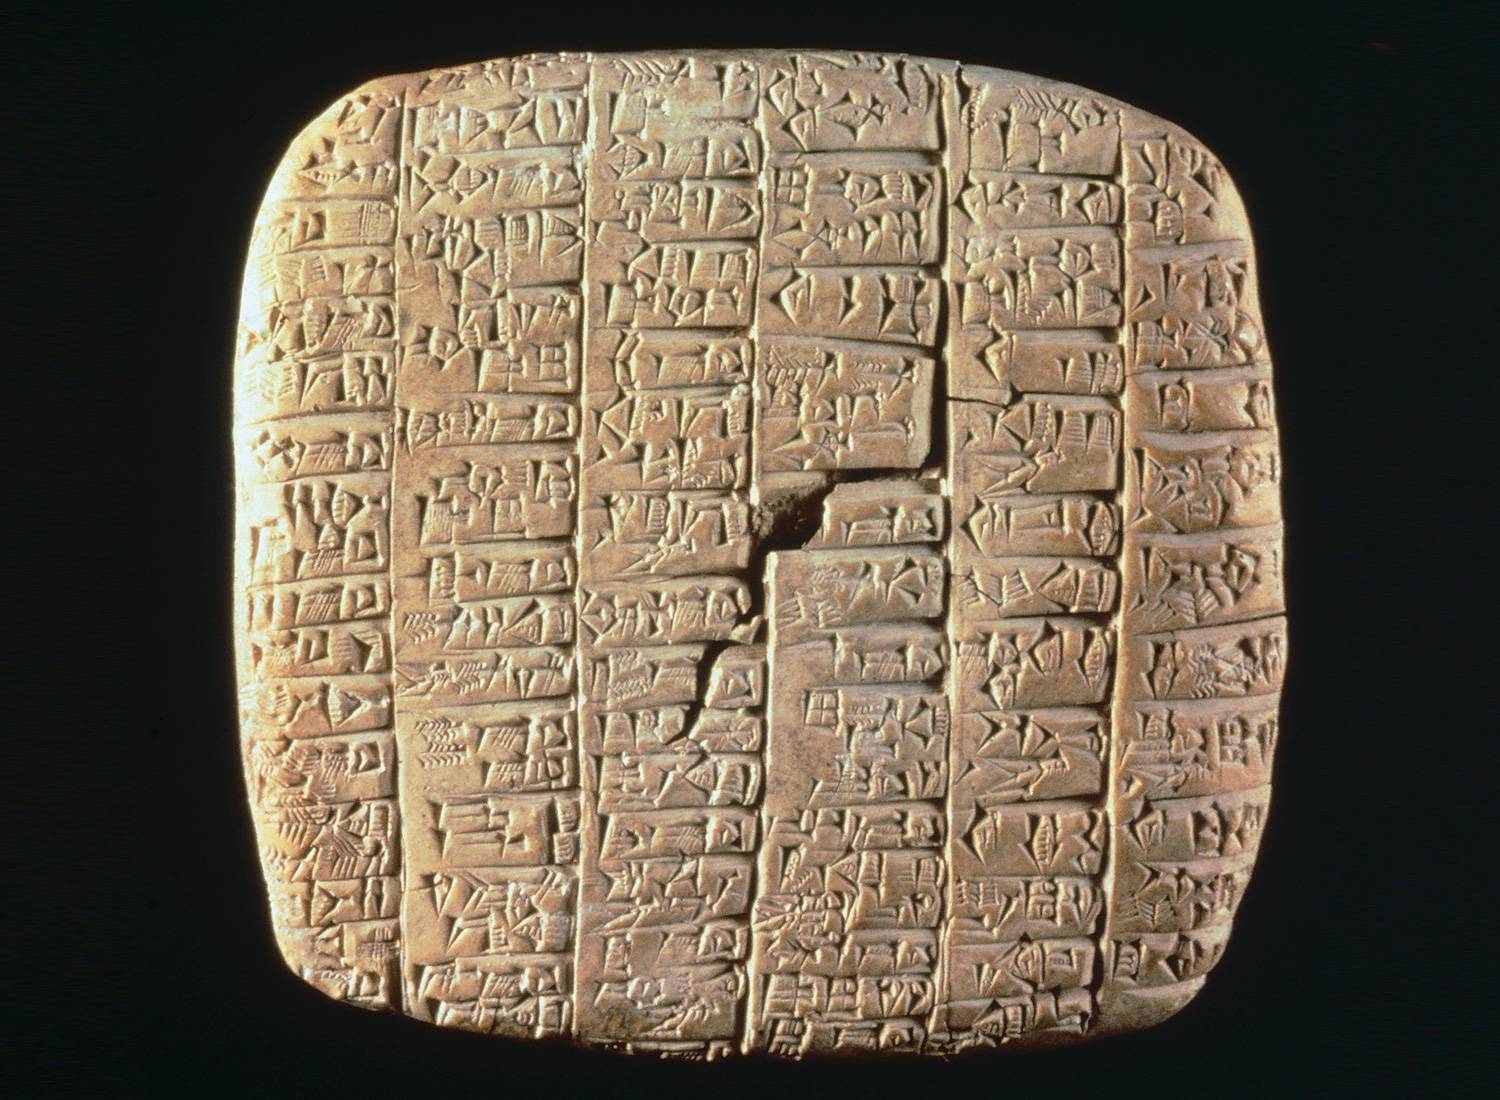 A clay tablet discovered at Ebla engraved with cuneiform characters, third millennium BC.